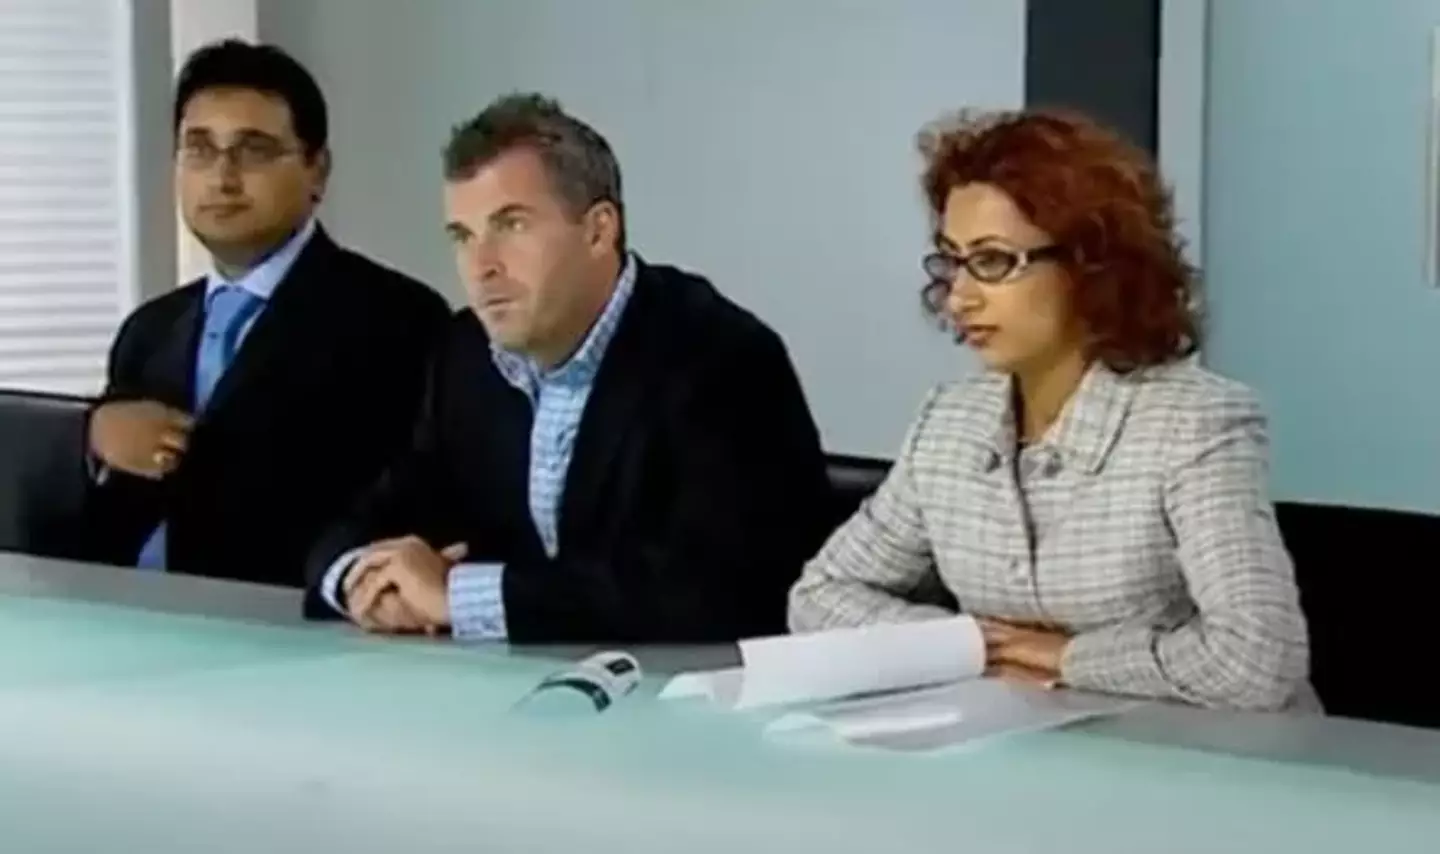 OG The Apprentice viewers will no doubt remember Saira Khan from the first ever series.